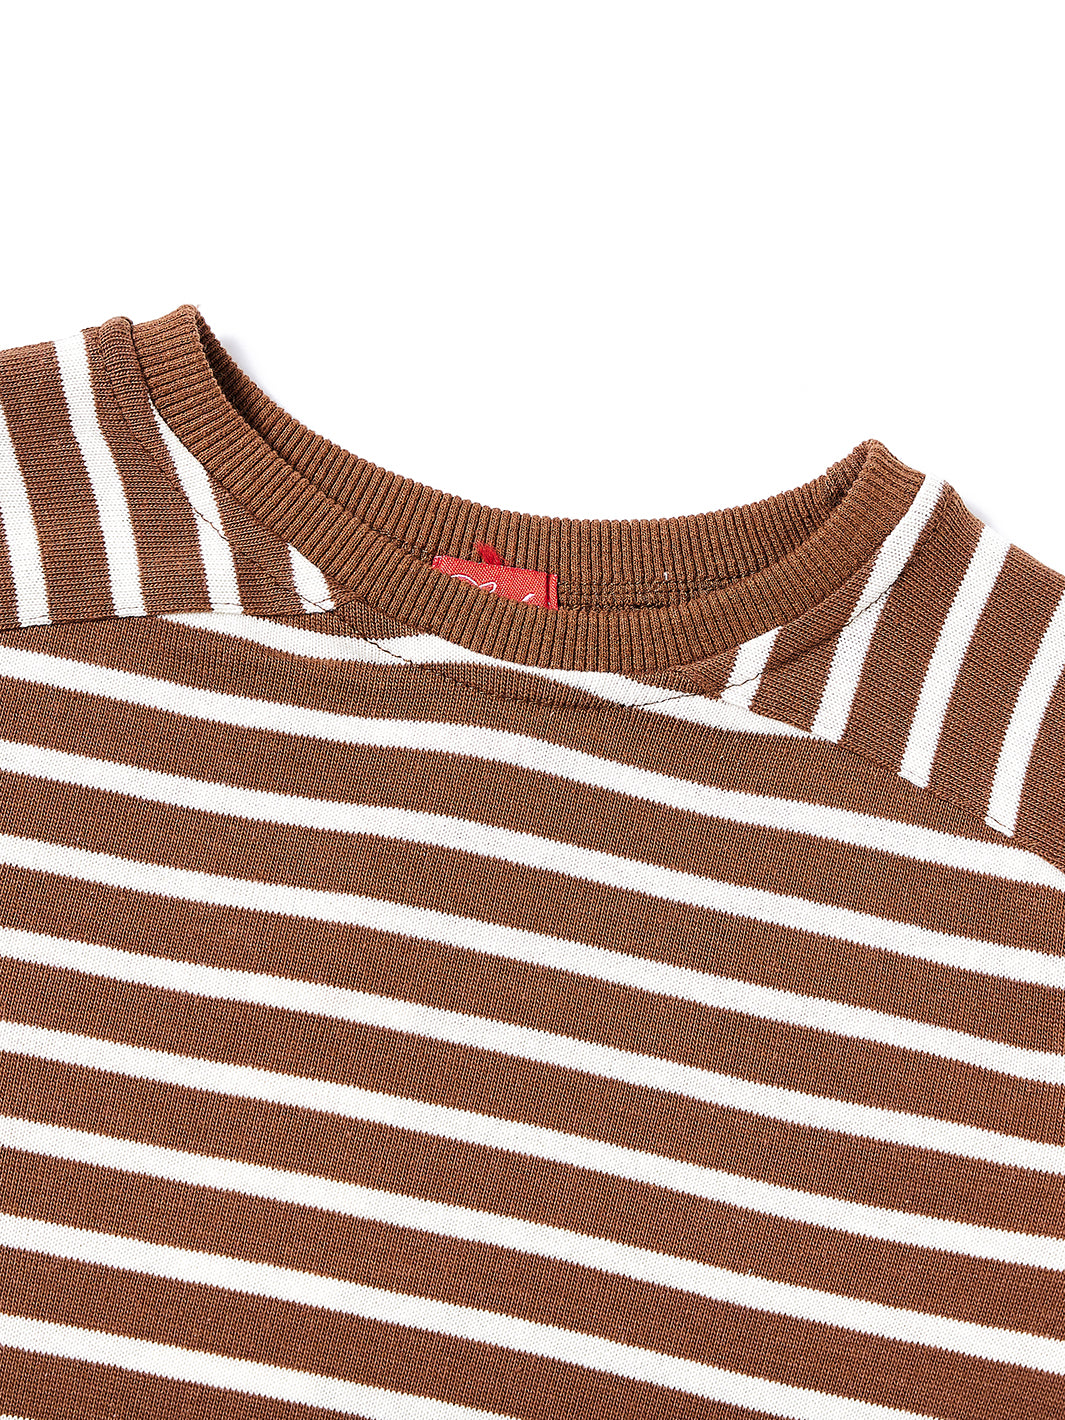 Shoulder Patch Classic Striped Top - Brown